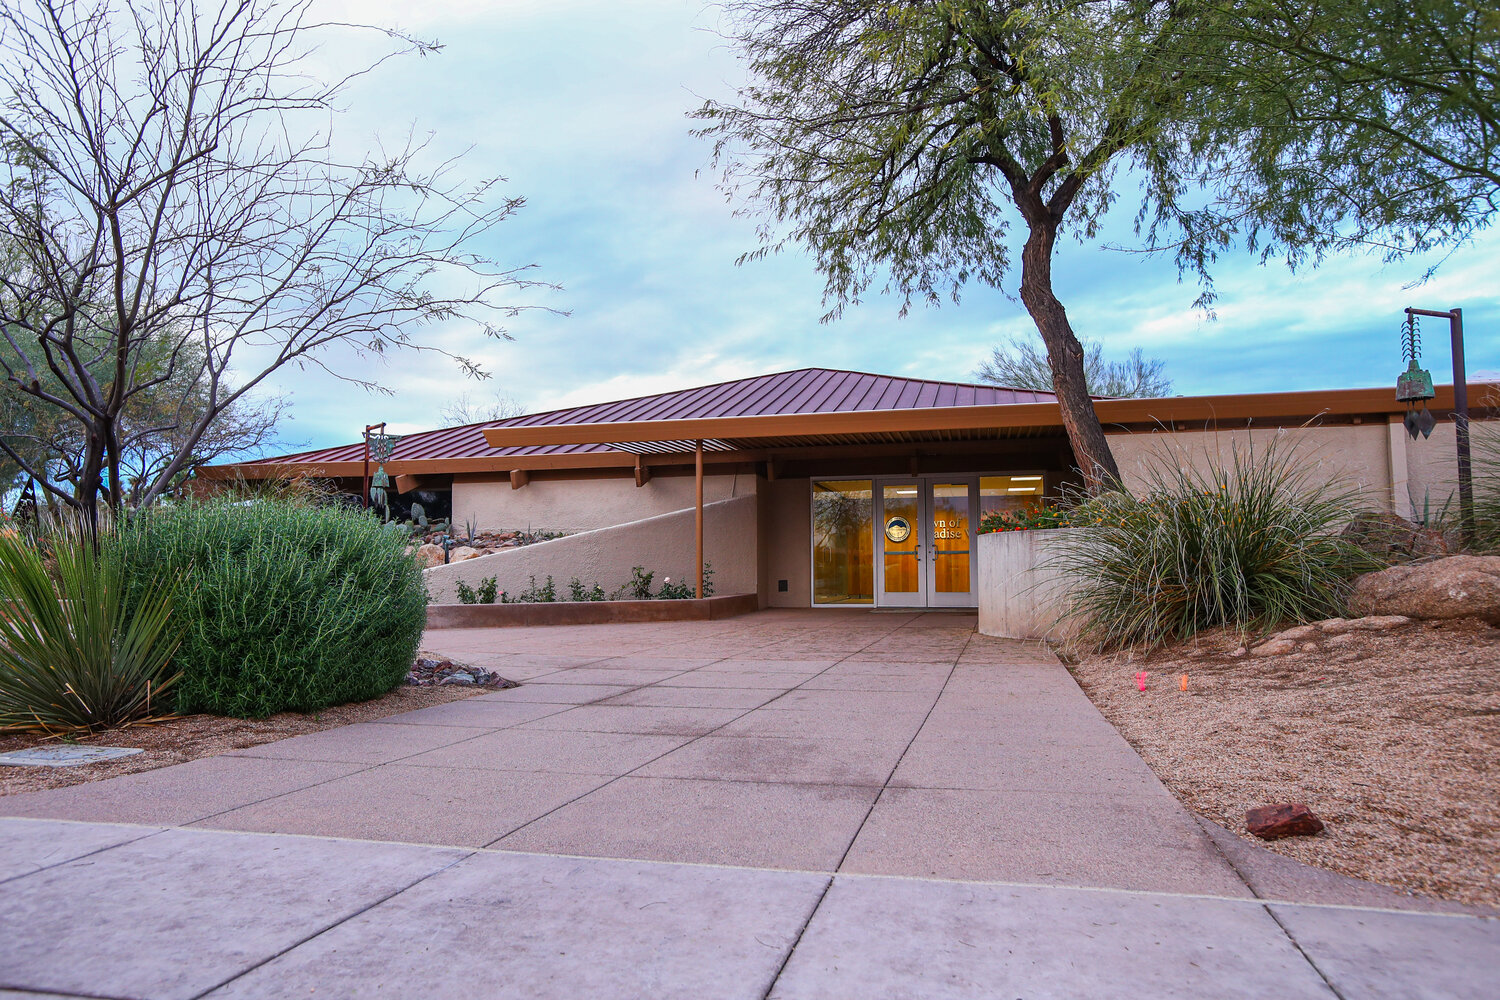 Paradise Valley Town Hall is closed for Thanksgiving holiday.